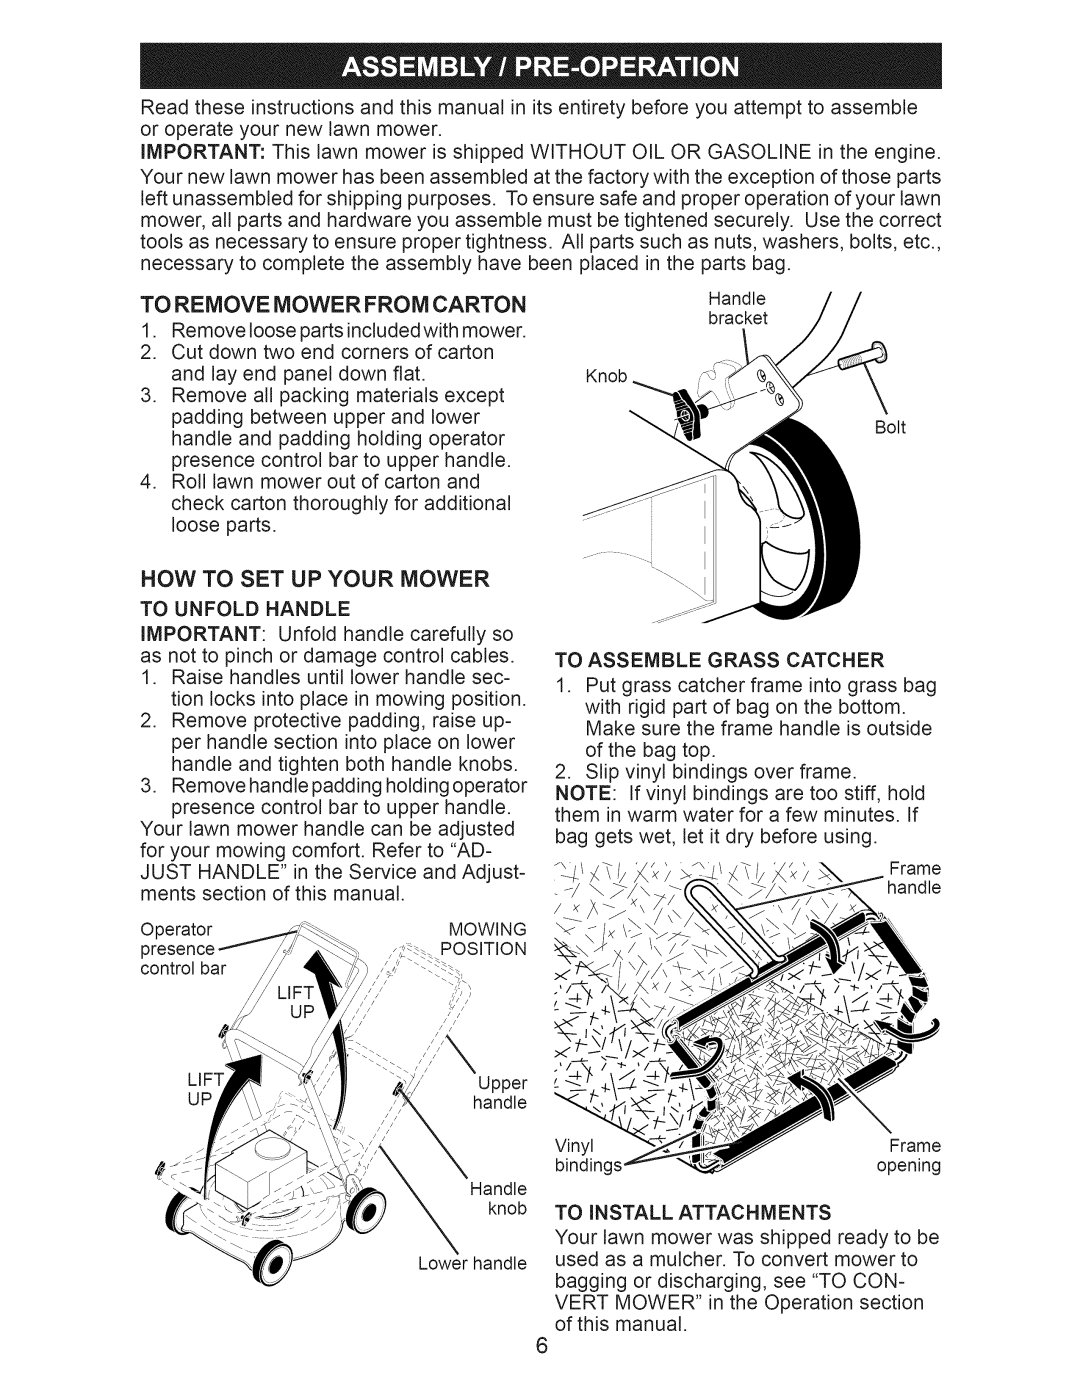 Craftsman 917.376403 manual To Remove Mower From Carton, Now To Set Up Your Mower 